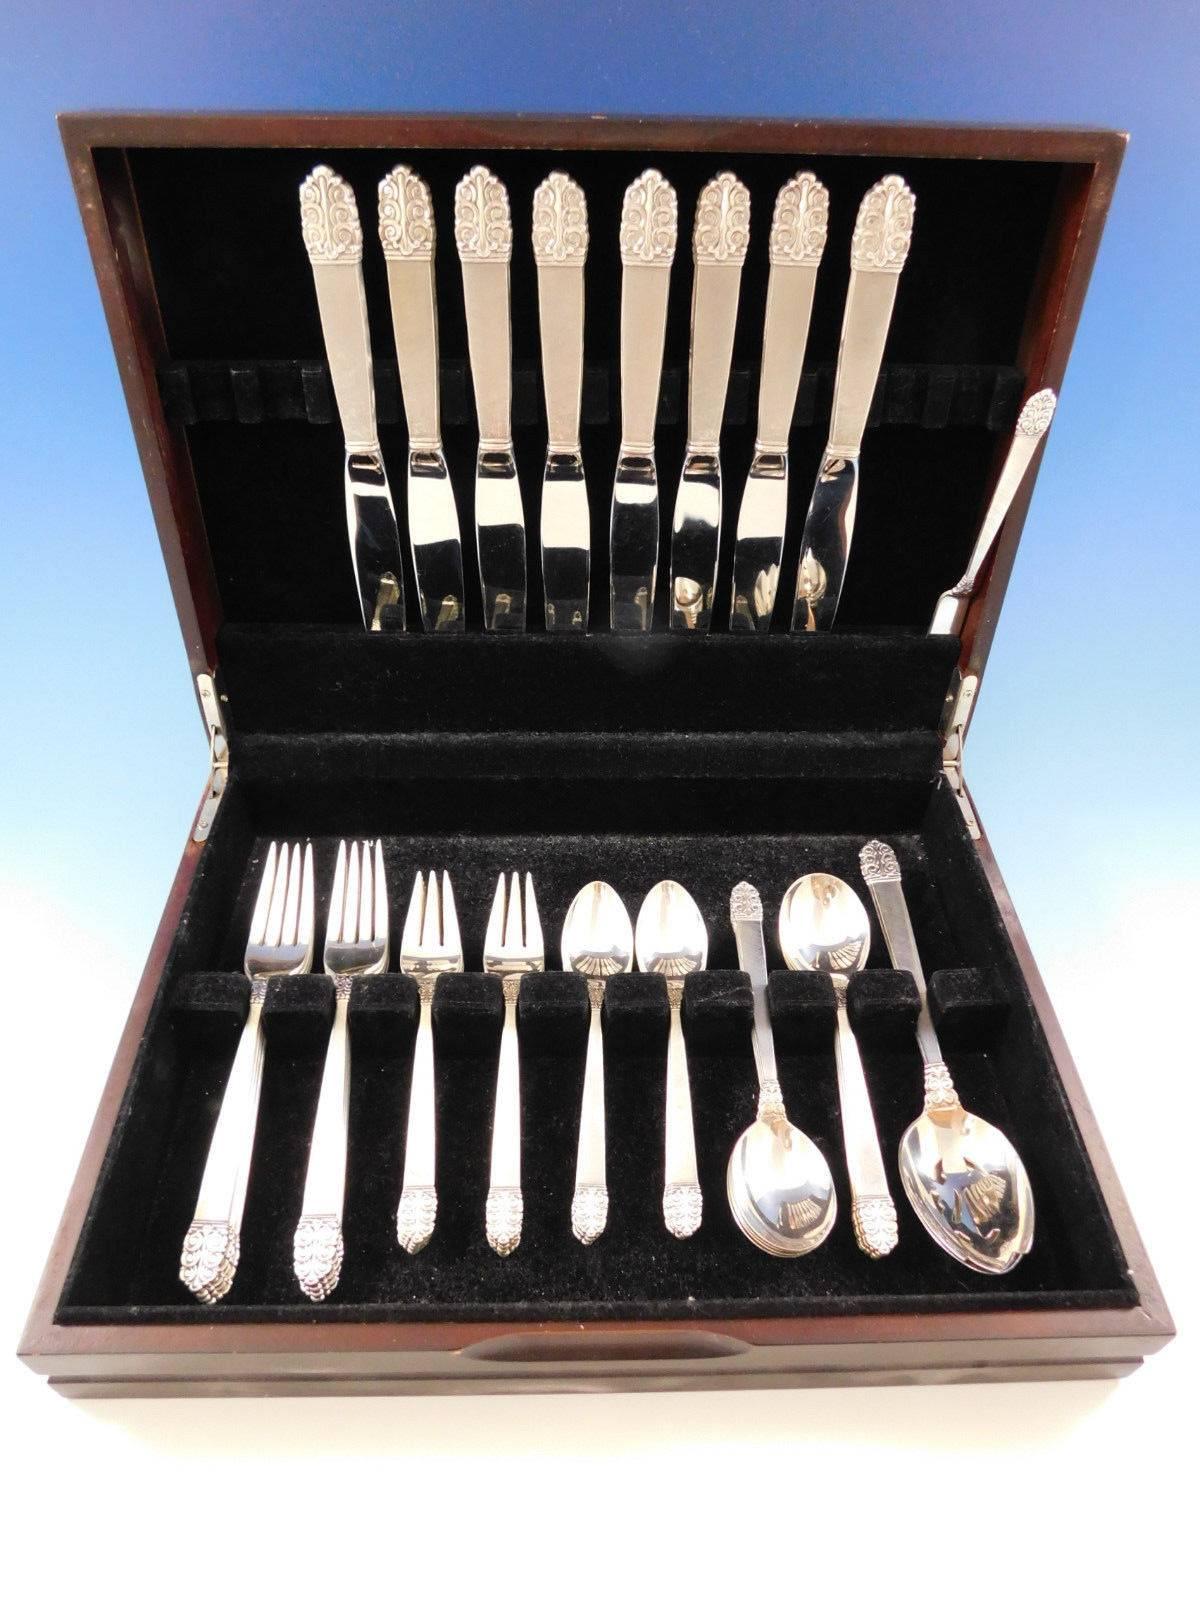 Dinner size matte finish Northern lights by International sterling silver post-war Scandinavian-modern design flatware set, 43 pieces. This pattern was designed by Alfred Kintz, circa 1946. 

This set includes:

Eight dinner size knives, 9